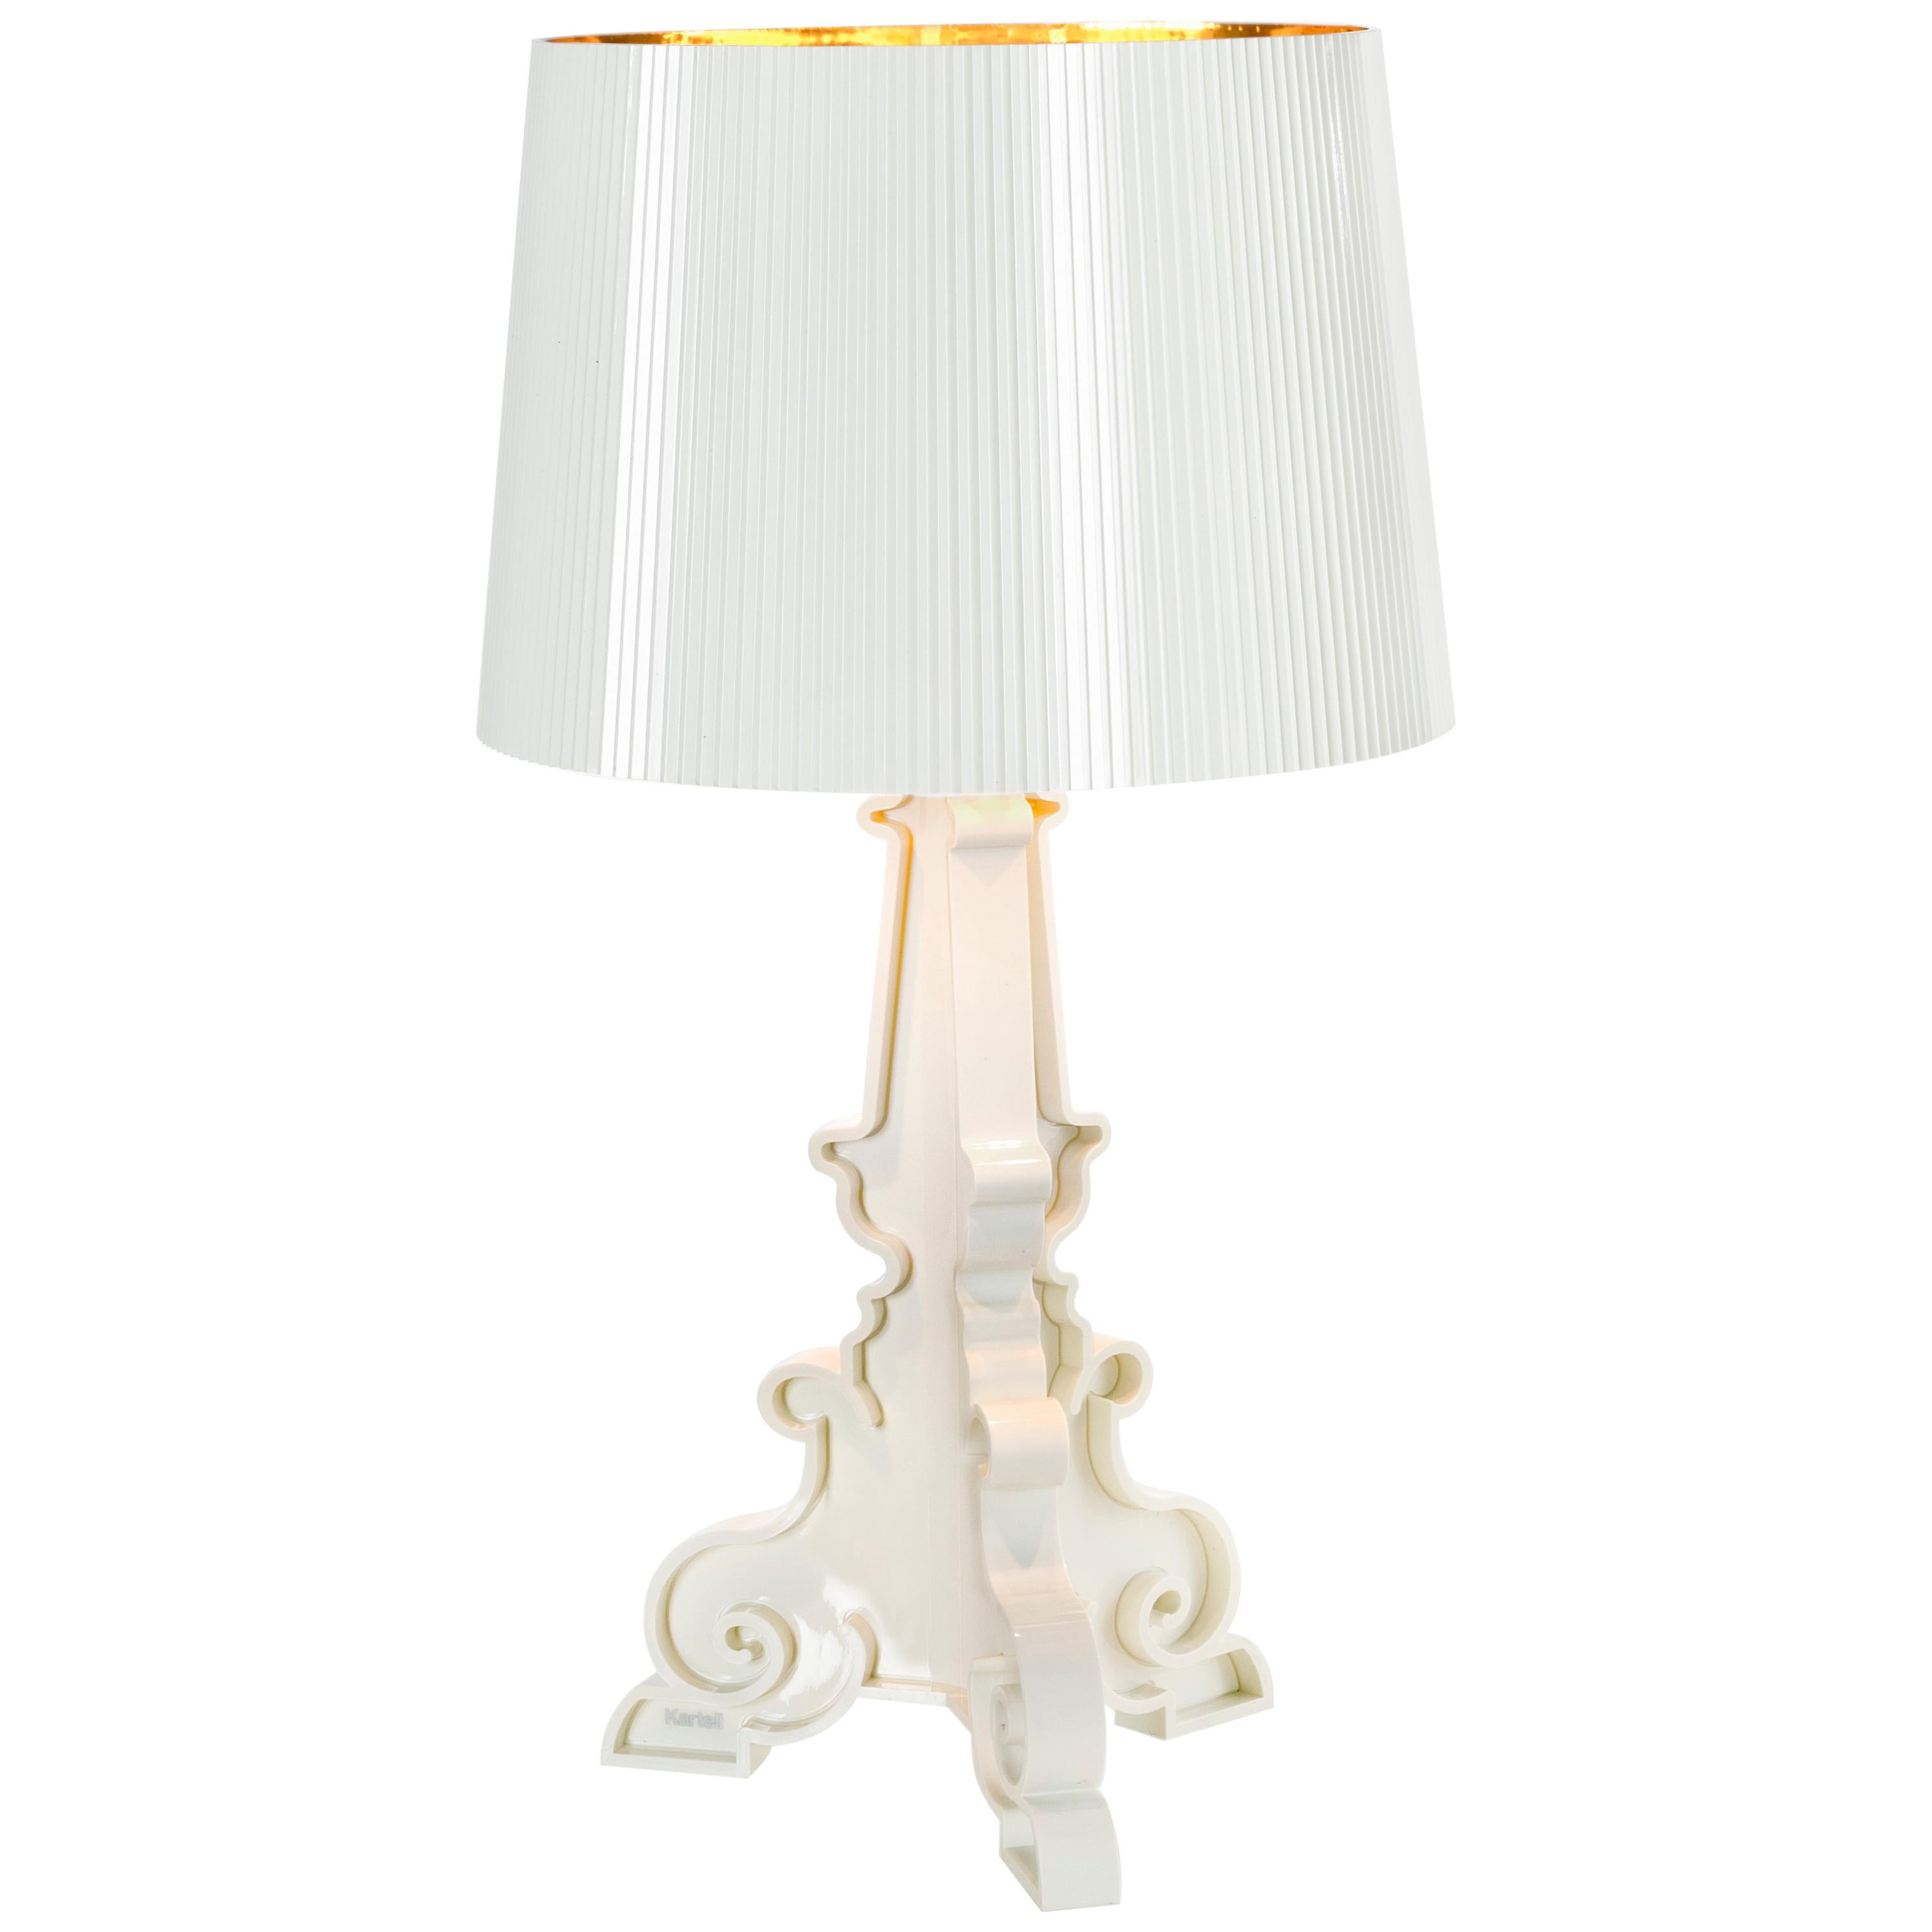 Kartell Bourgie Lamp in White and Gold by Ferruccio Laviani